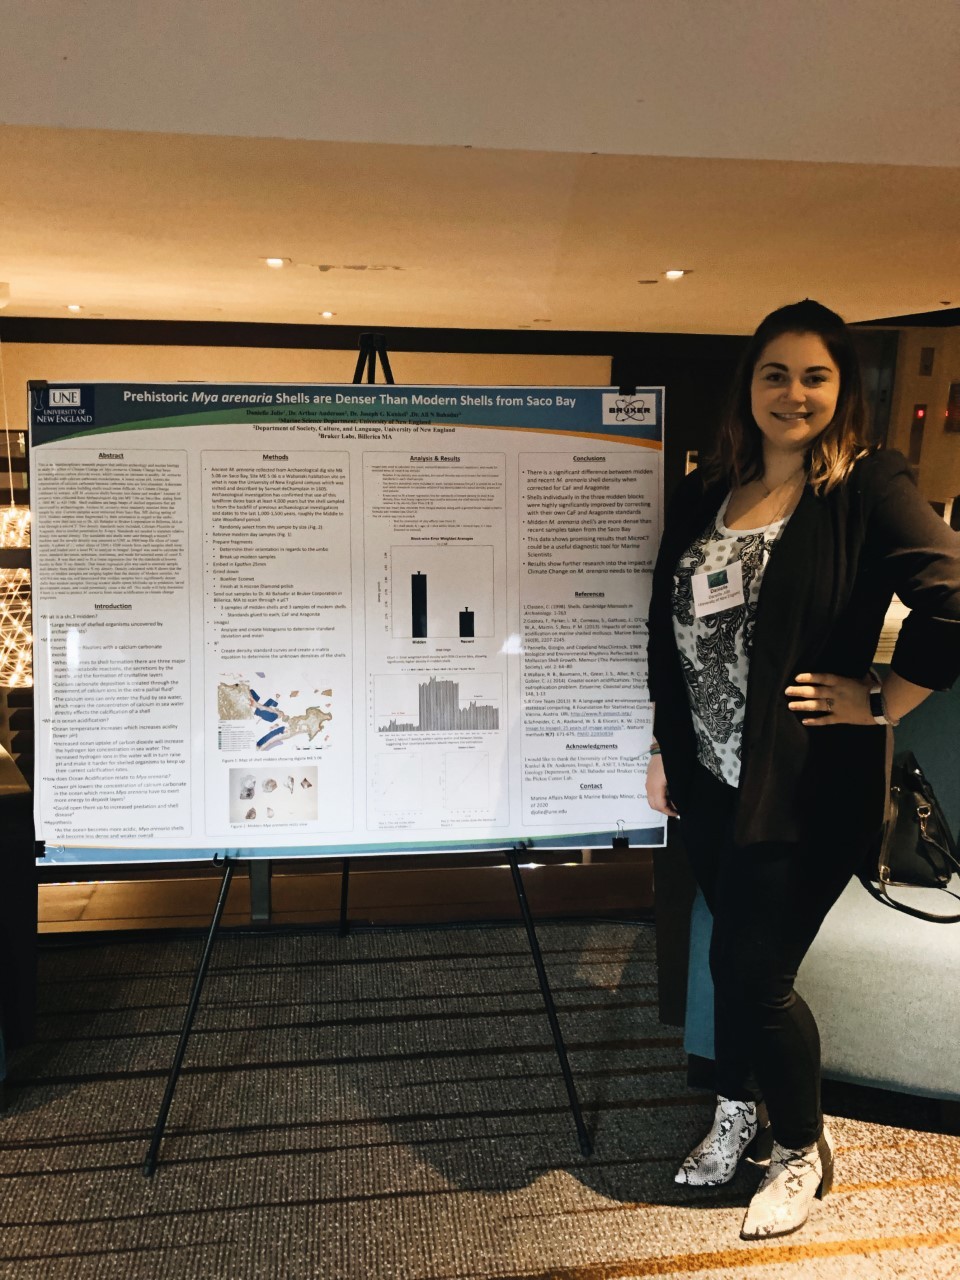 Student Danielle Jolie presented her research poster on the density of shells